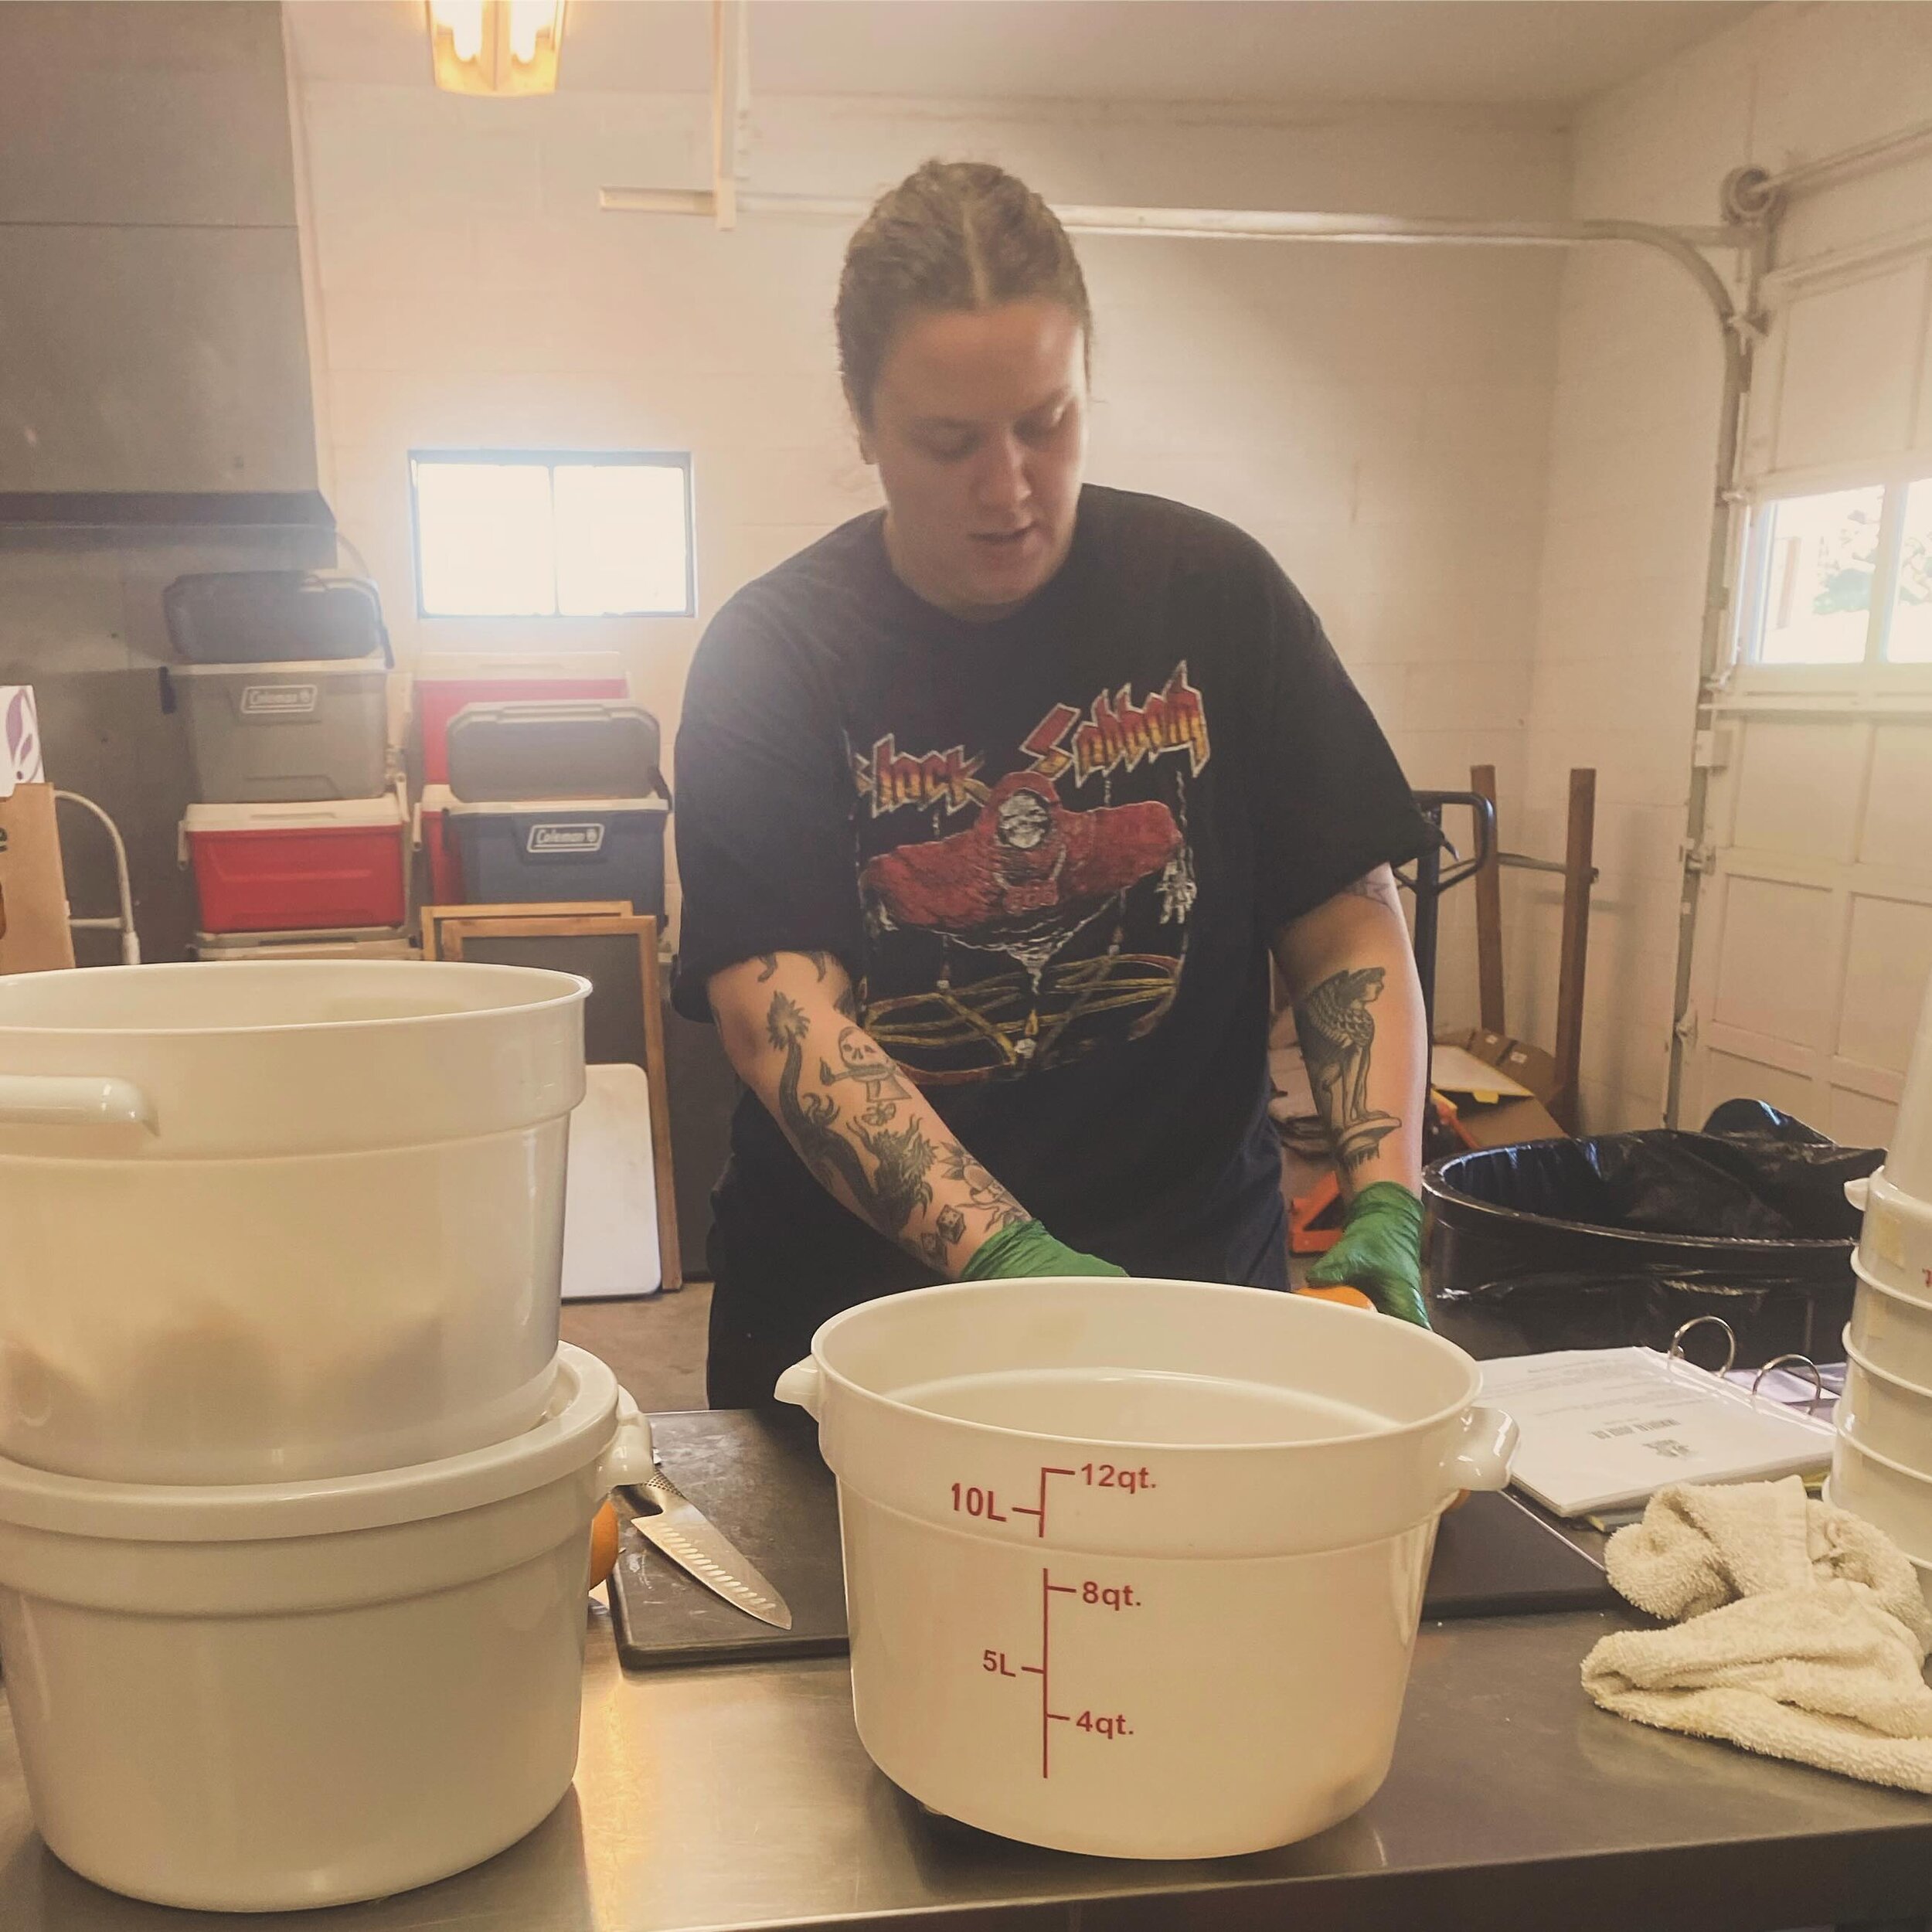 @aliraefoods snapped this pic of me doin some juice prep today. Anyone unfamiliar with cold pressed juicing might not know the extent of the labor that goes into each bottle! We&rsquo;re so happy to be able to serve this community with healthy, organ